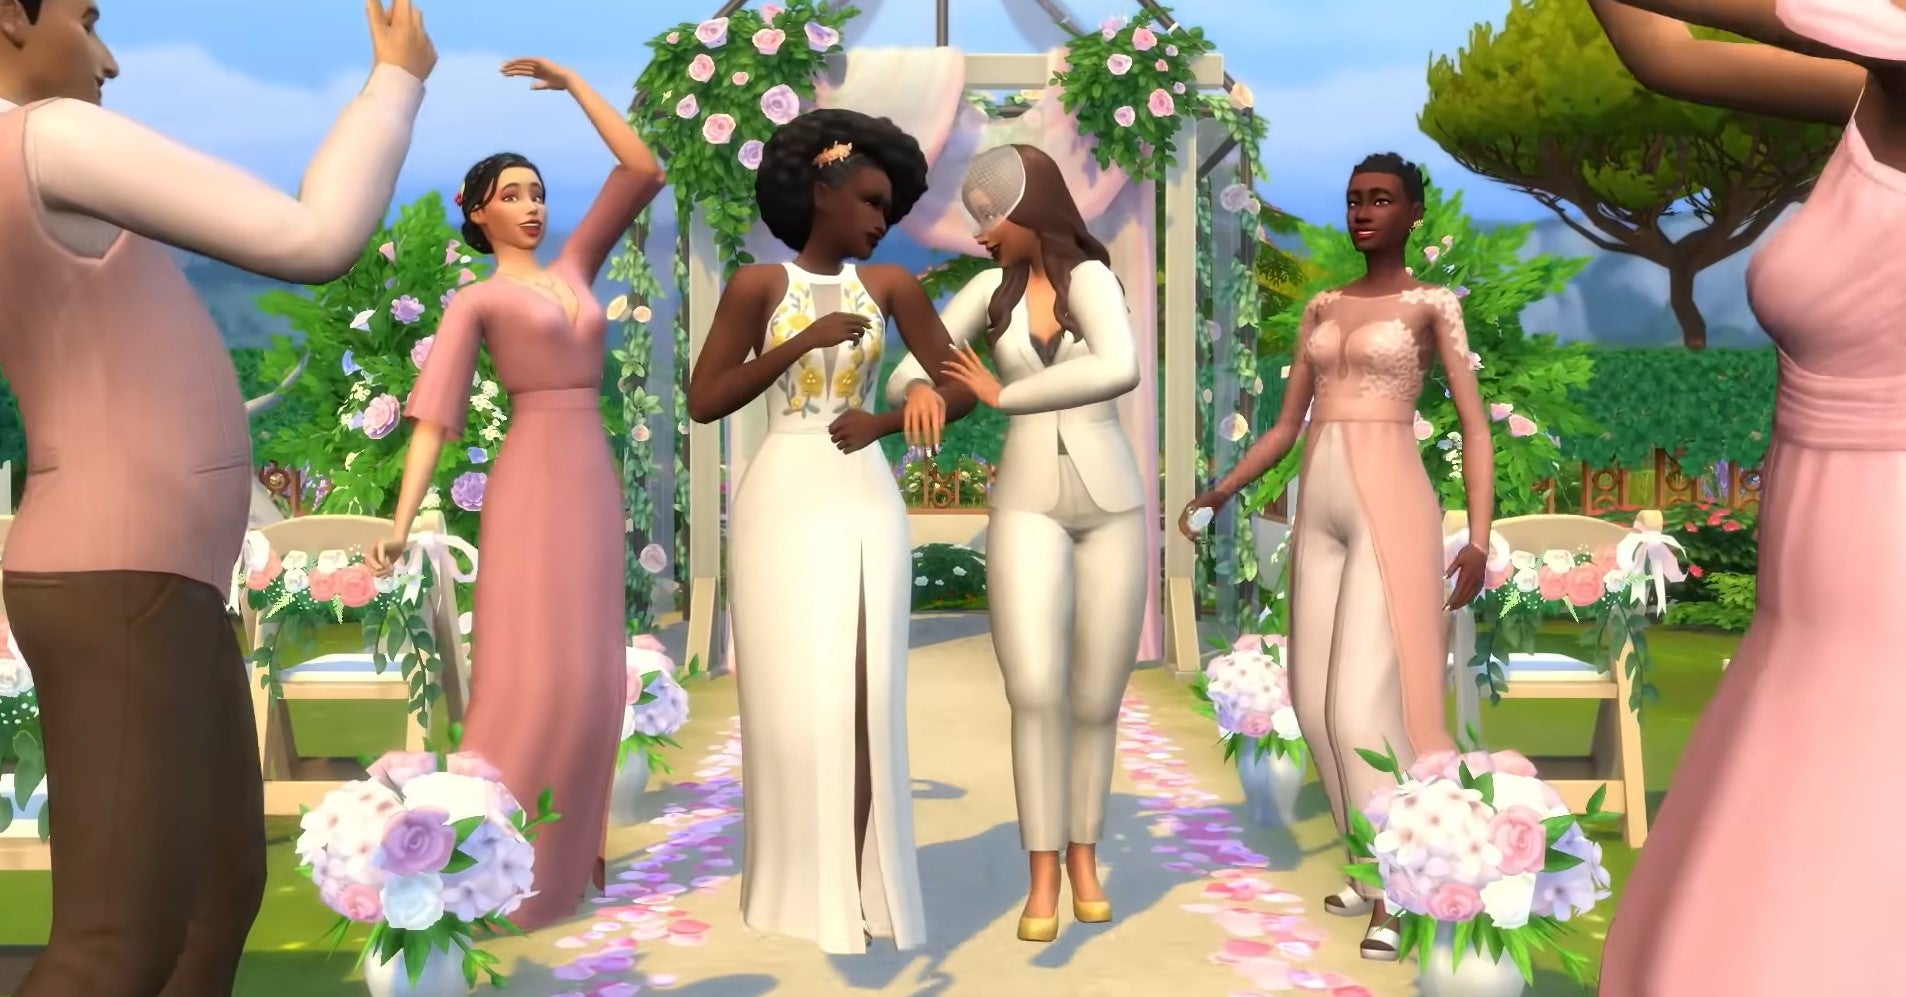 EA will not sell The Sims 4 wedding pack in Russia due to laws against same- sex marriage GamesIndustry.biz pic